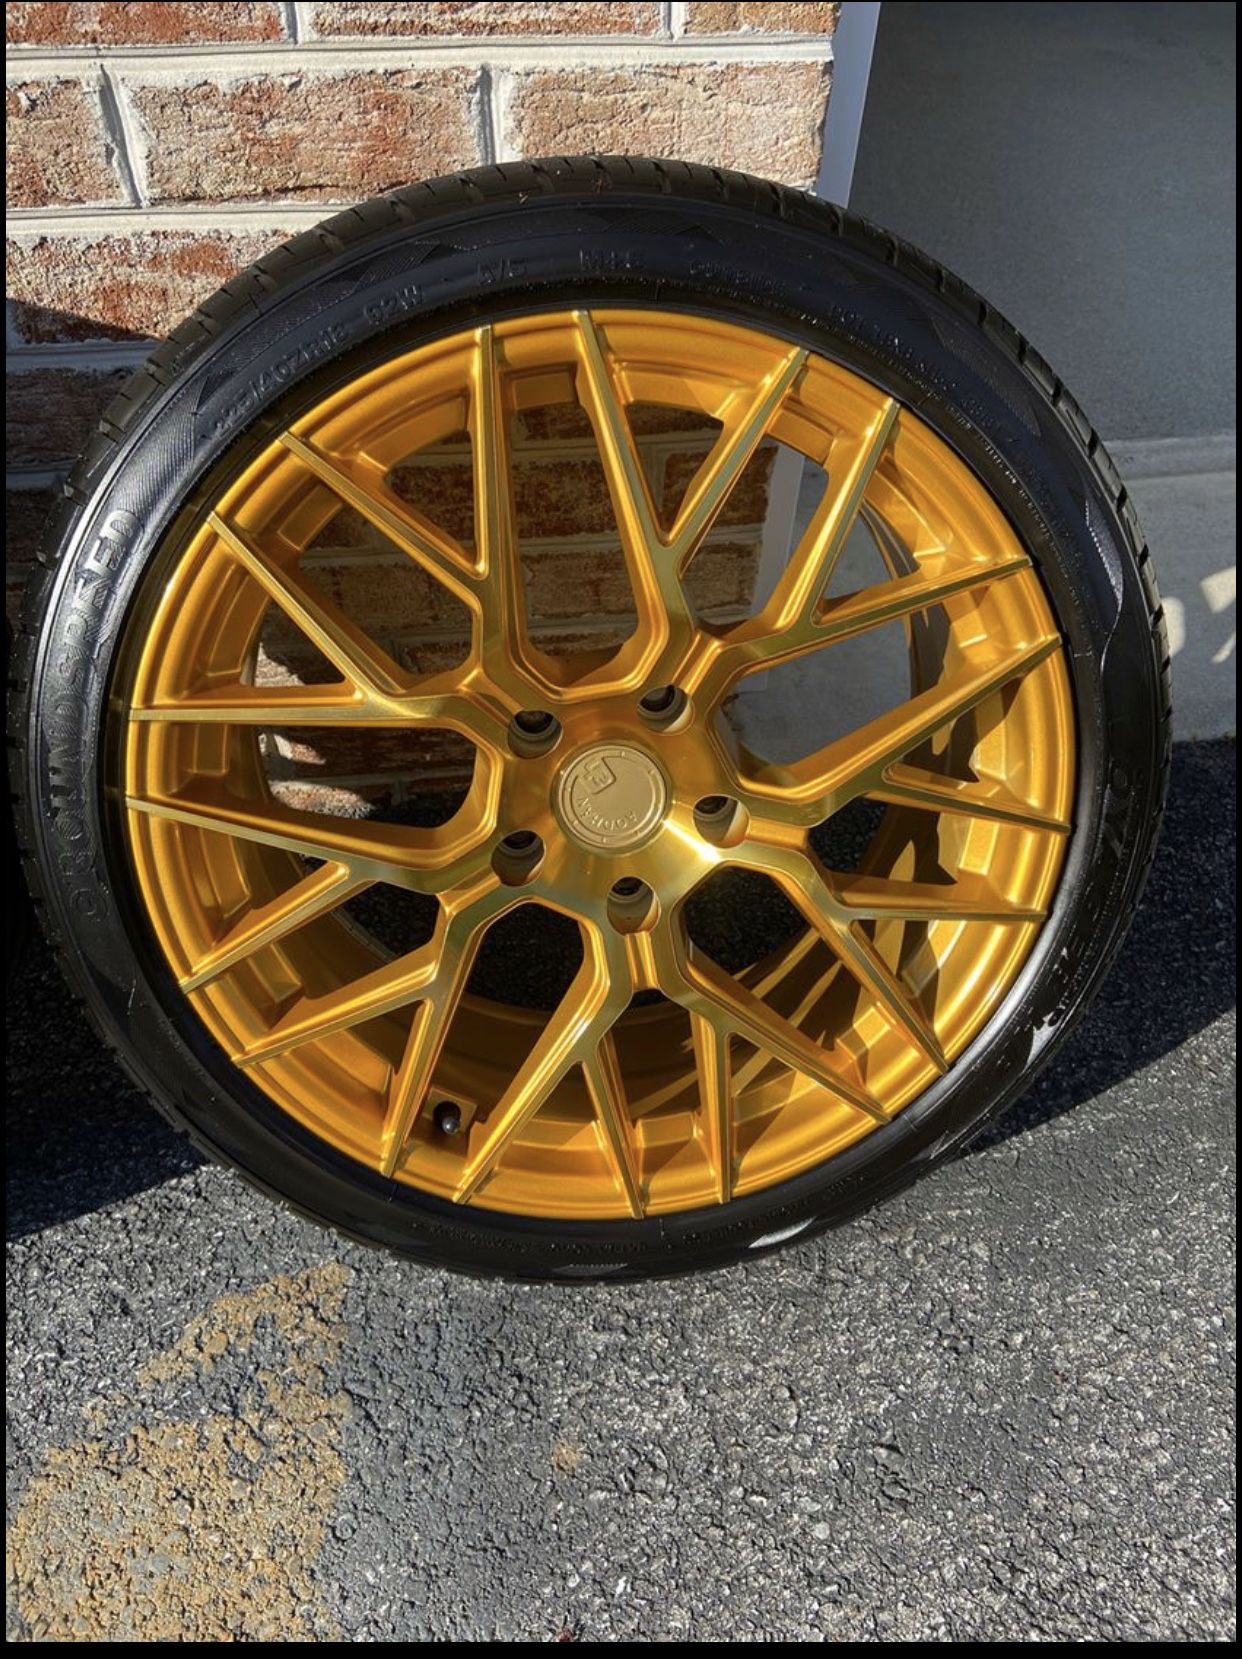 Rims with tires